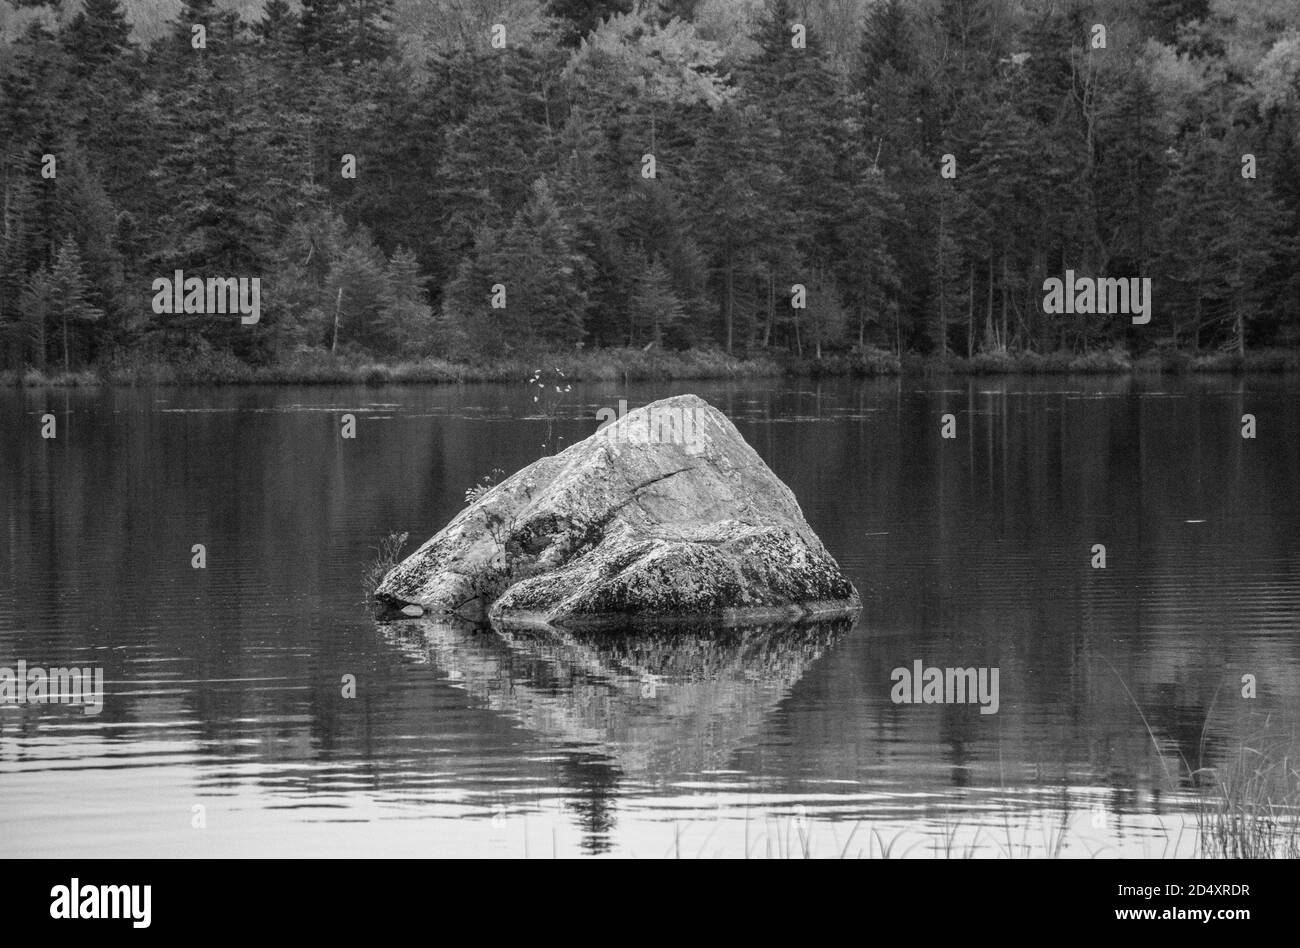 Black and white photo of large boulder sitting in pond, with trees in the background. Stock Photo